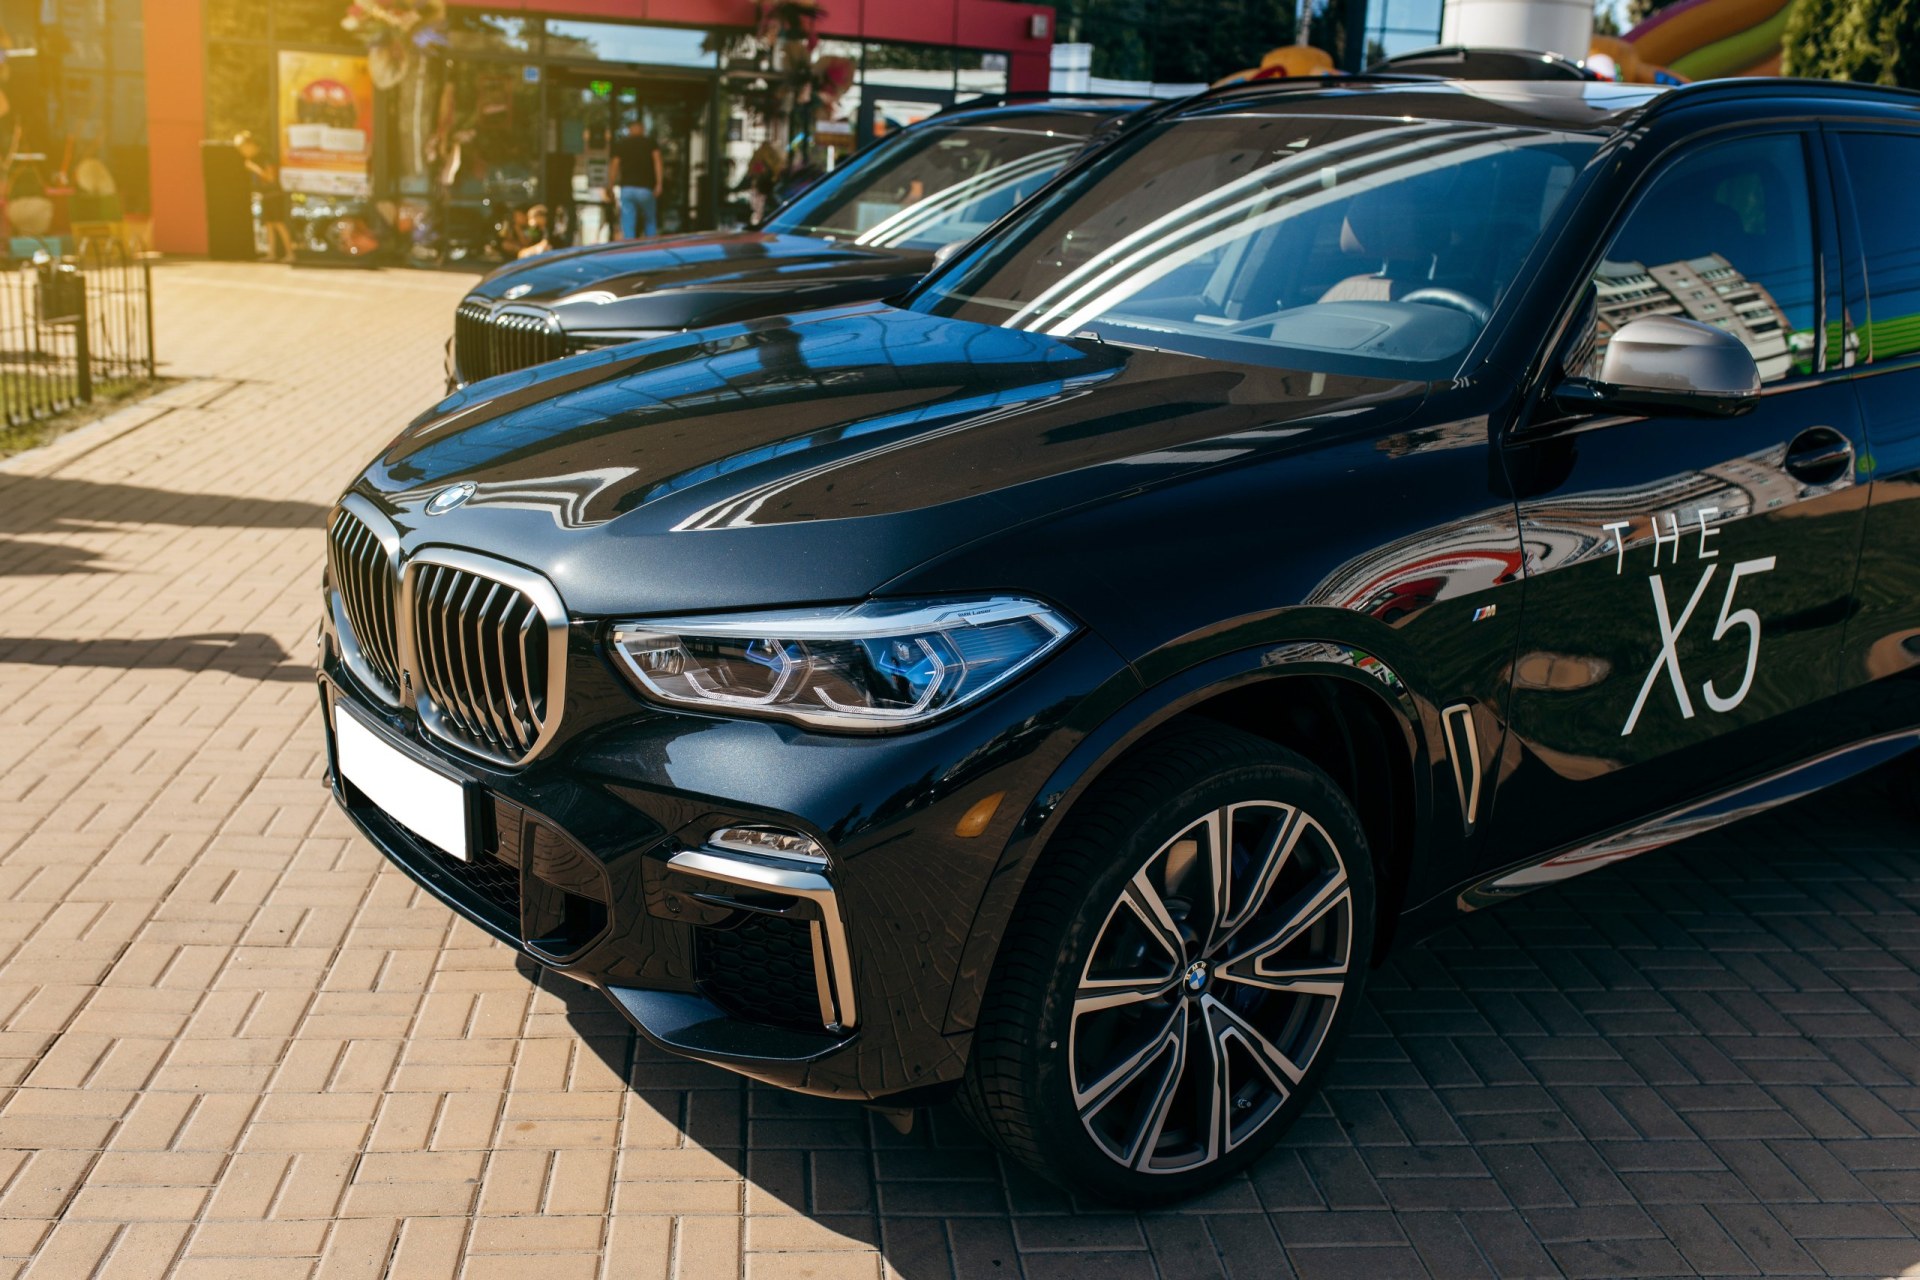 New 2020 model of a BMW X5 on display outside 